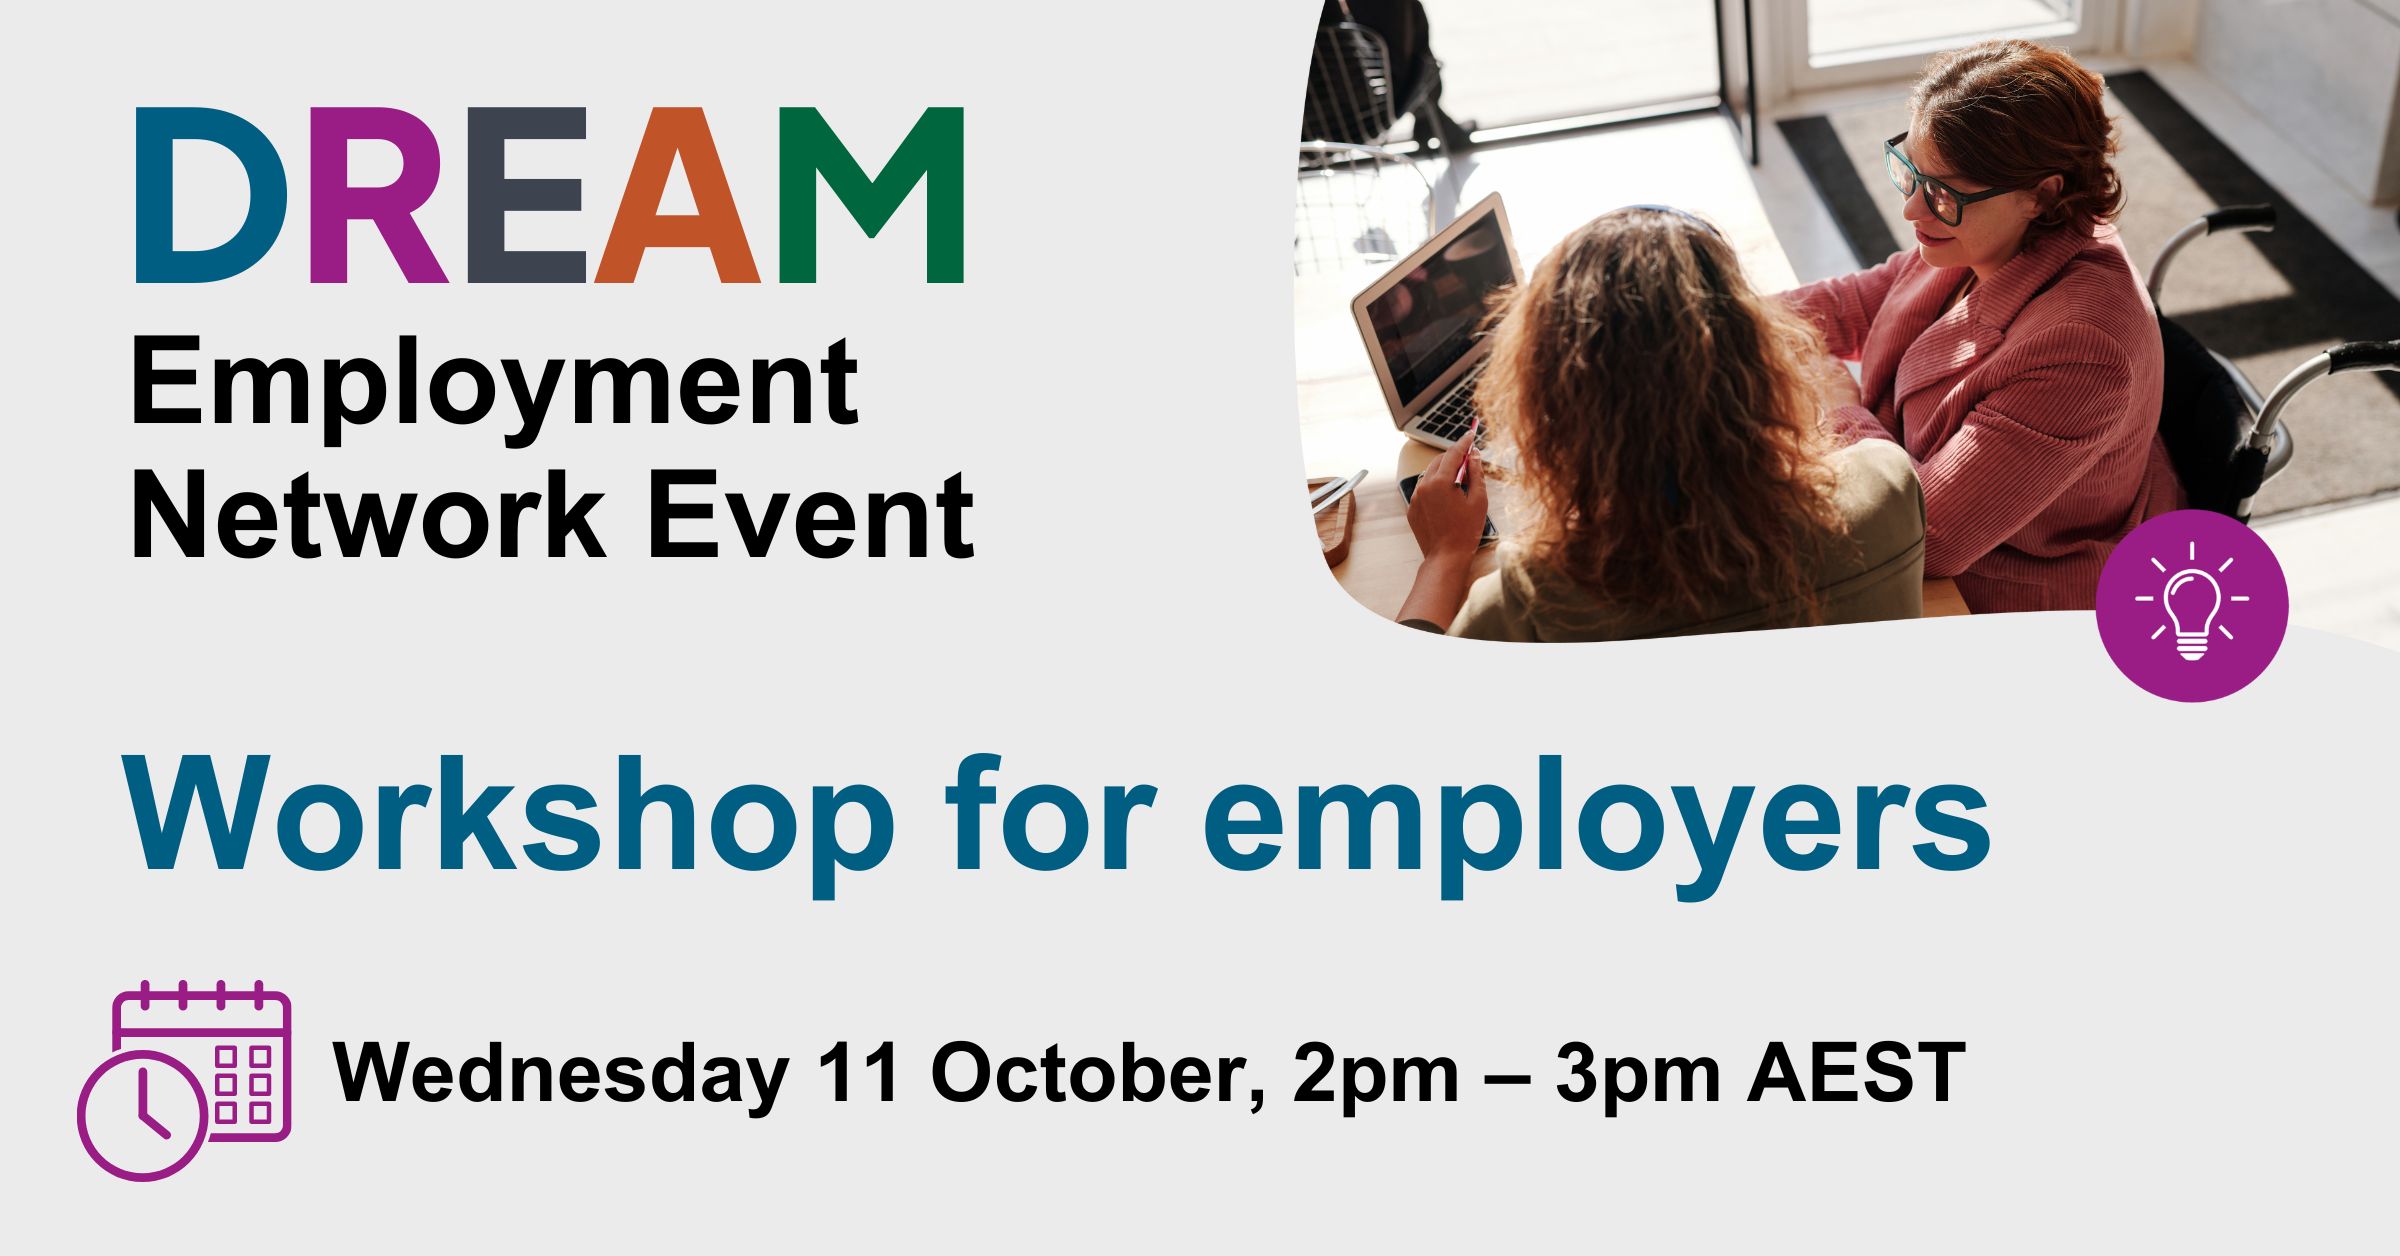 Dream employment network event Workshop for employers, Wednesday 11 October, 2-3pm AEST.